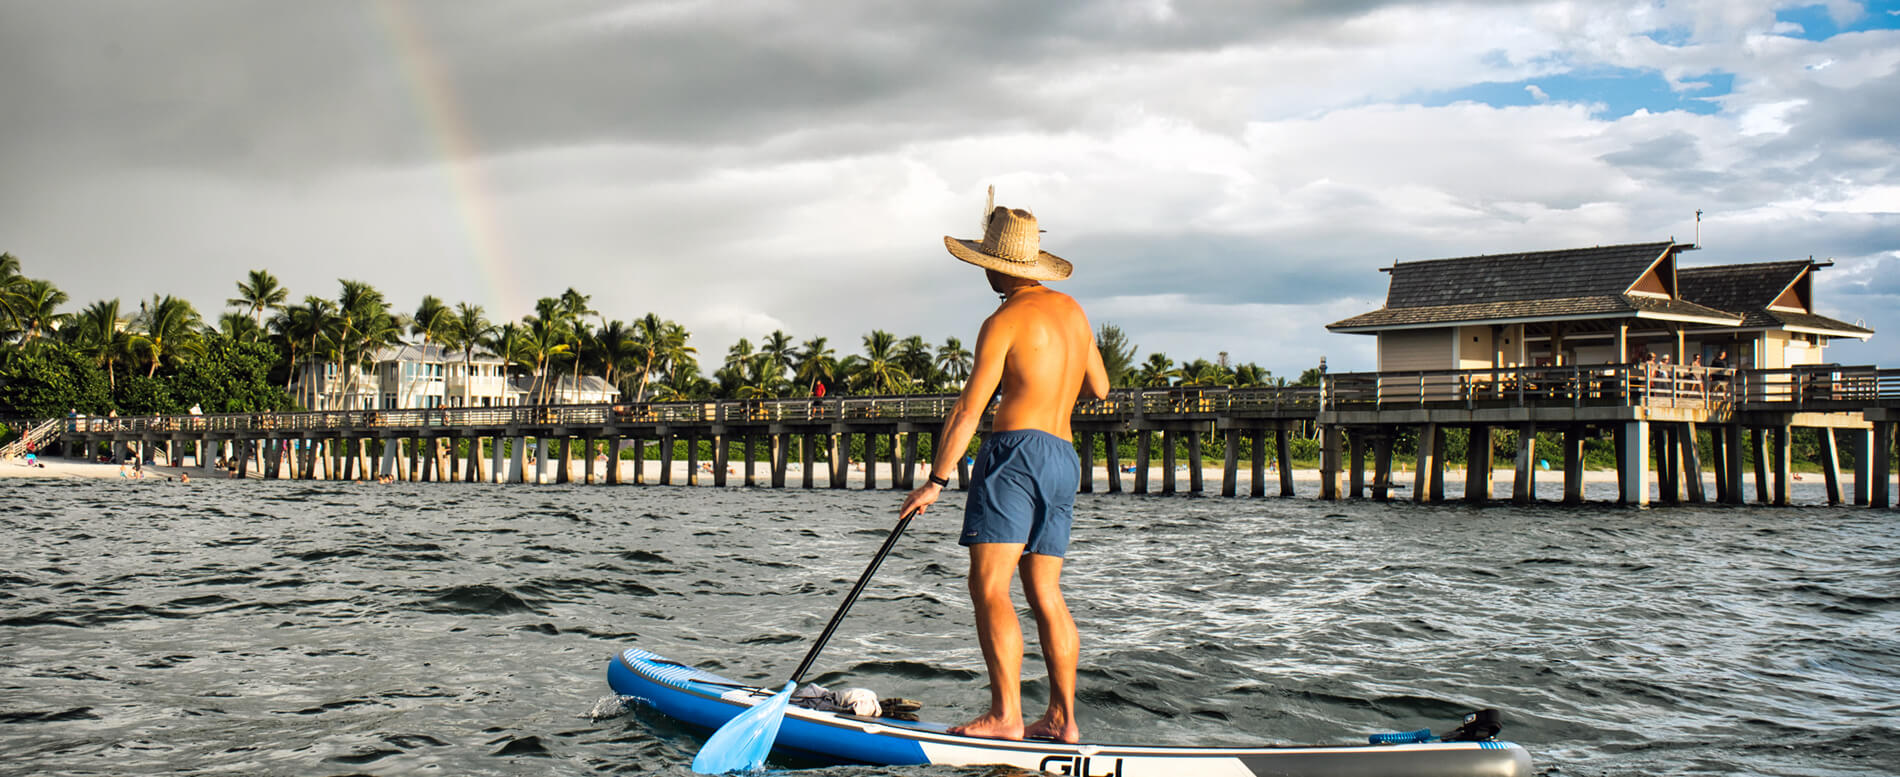 Man paddle boarding with a gili air inflatable paddle board on a beach